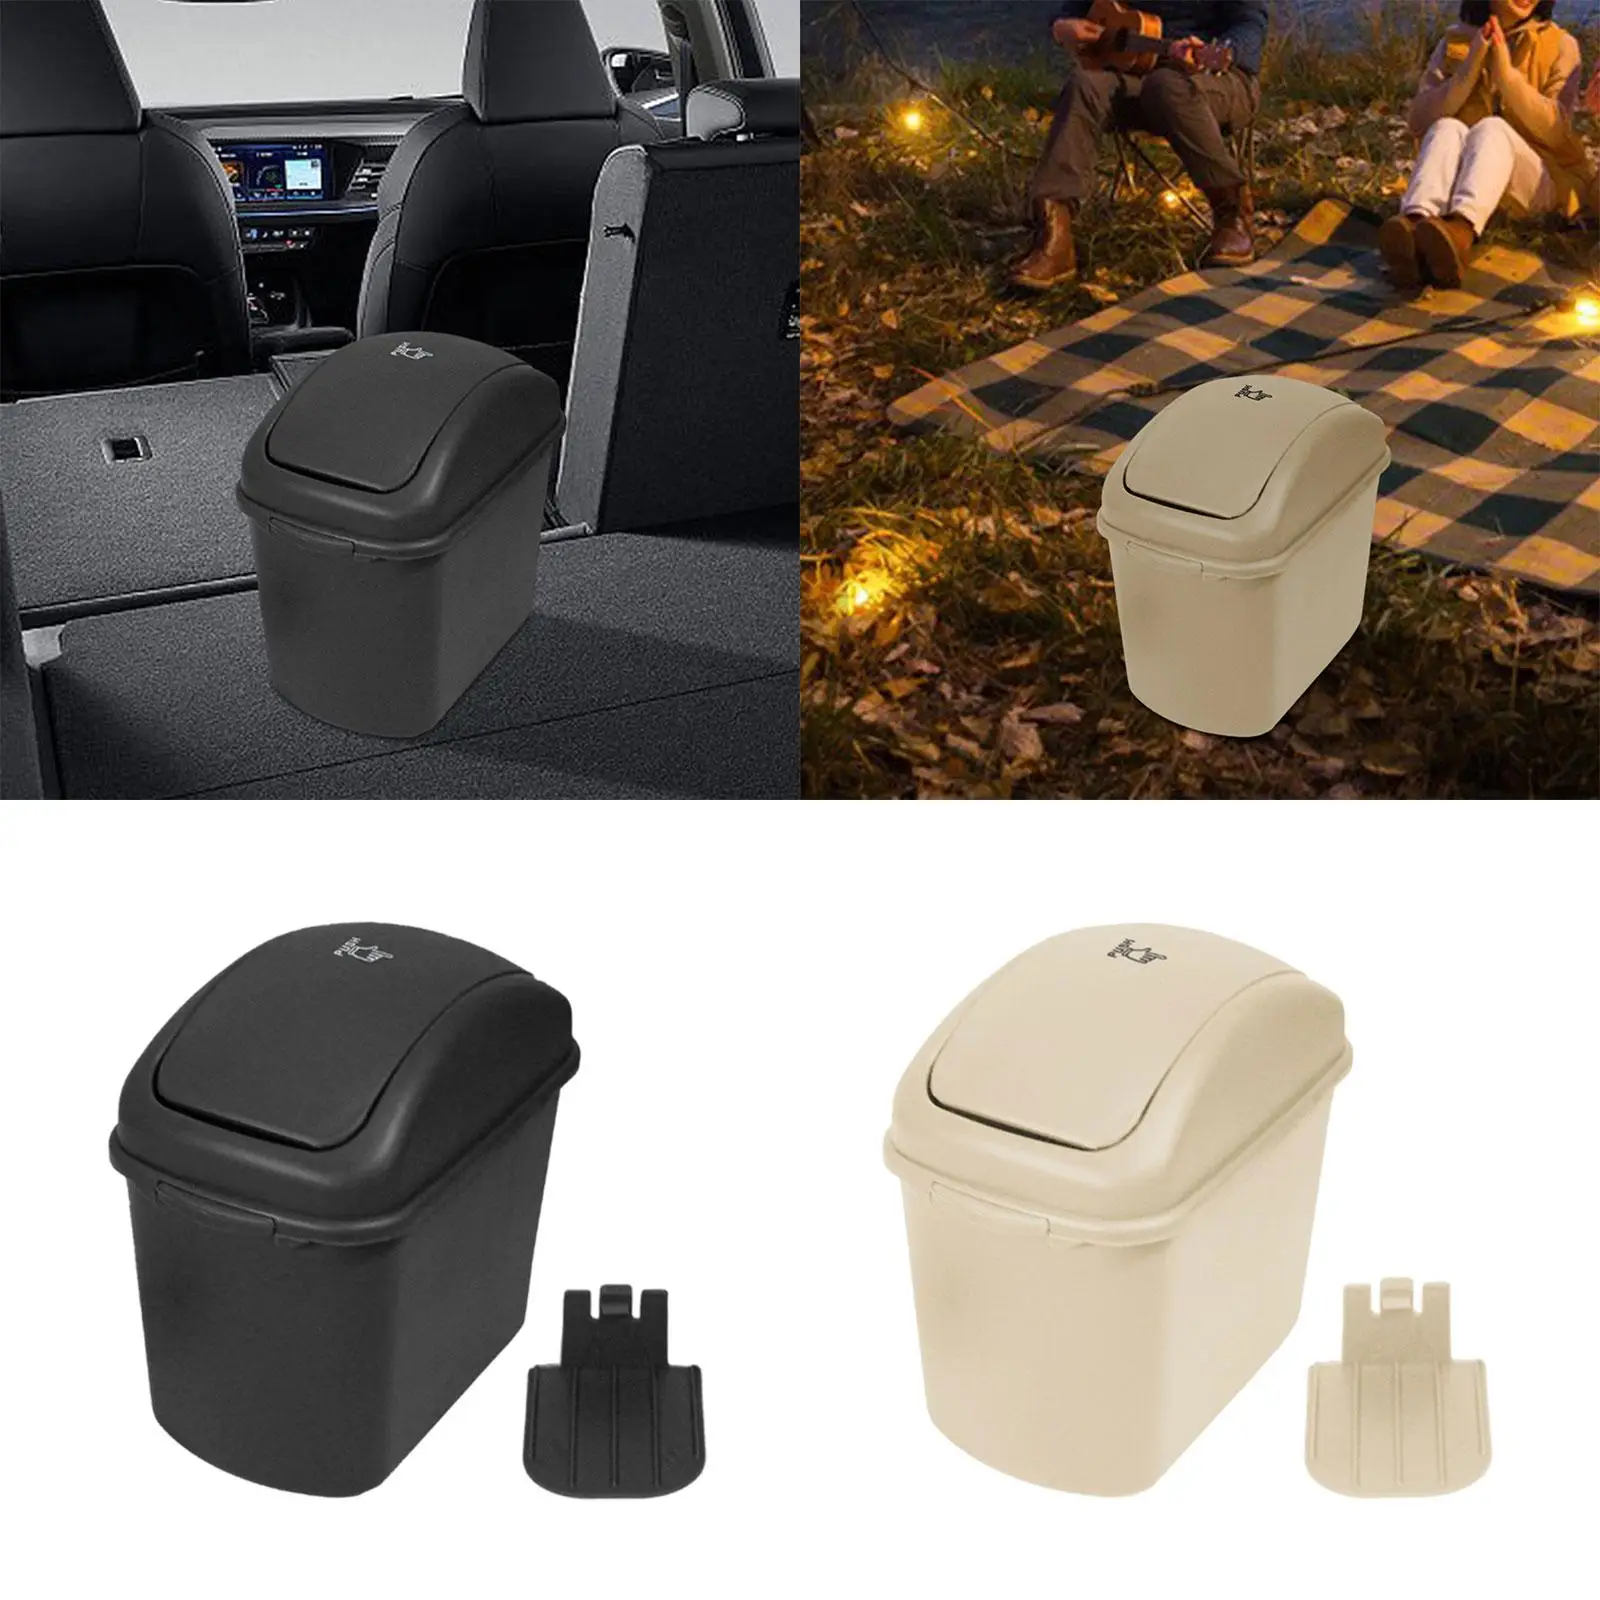 Garbage Bin Storage Outdoor Dustbin Waste Container Car Trash Can with Lid Trash Bin for Bathroom Bedroom Picnic Travel Hiking